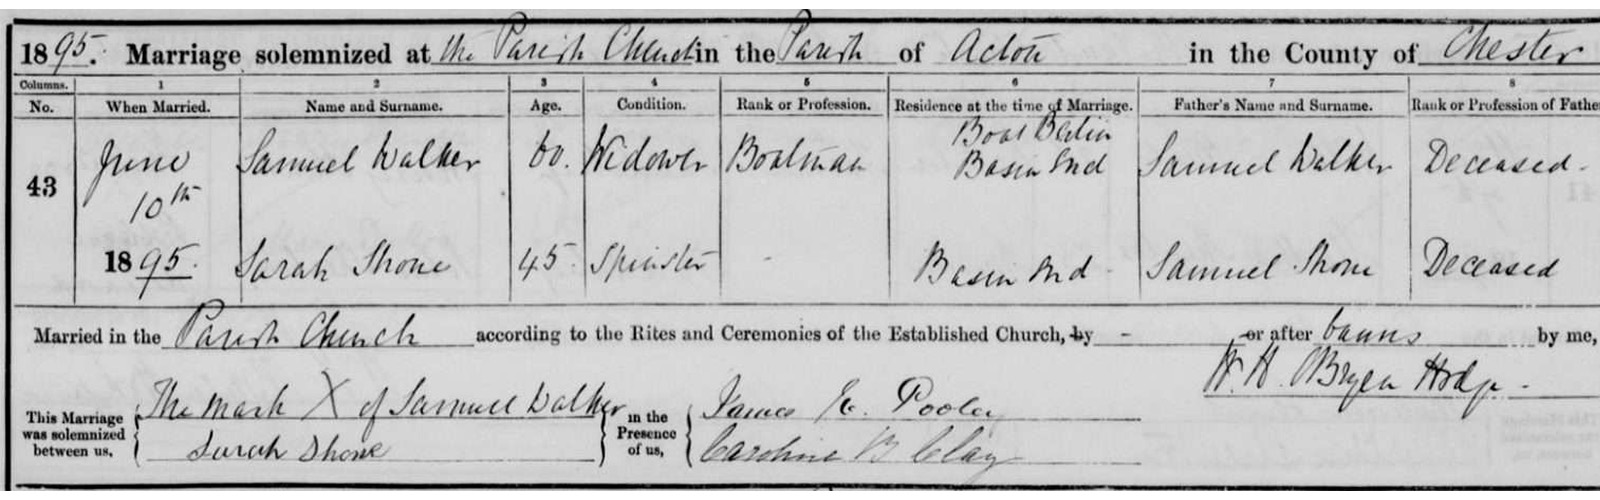 marriage certificate 1895